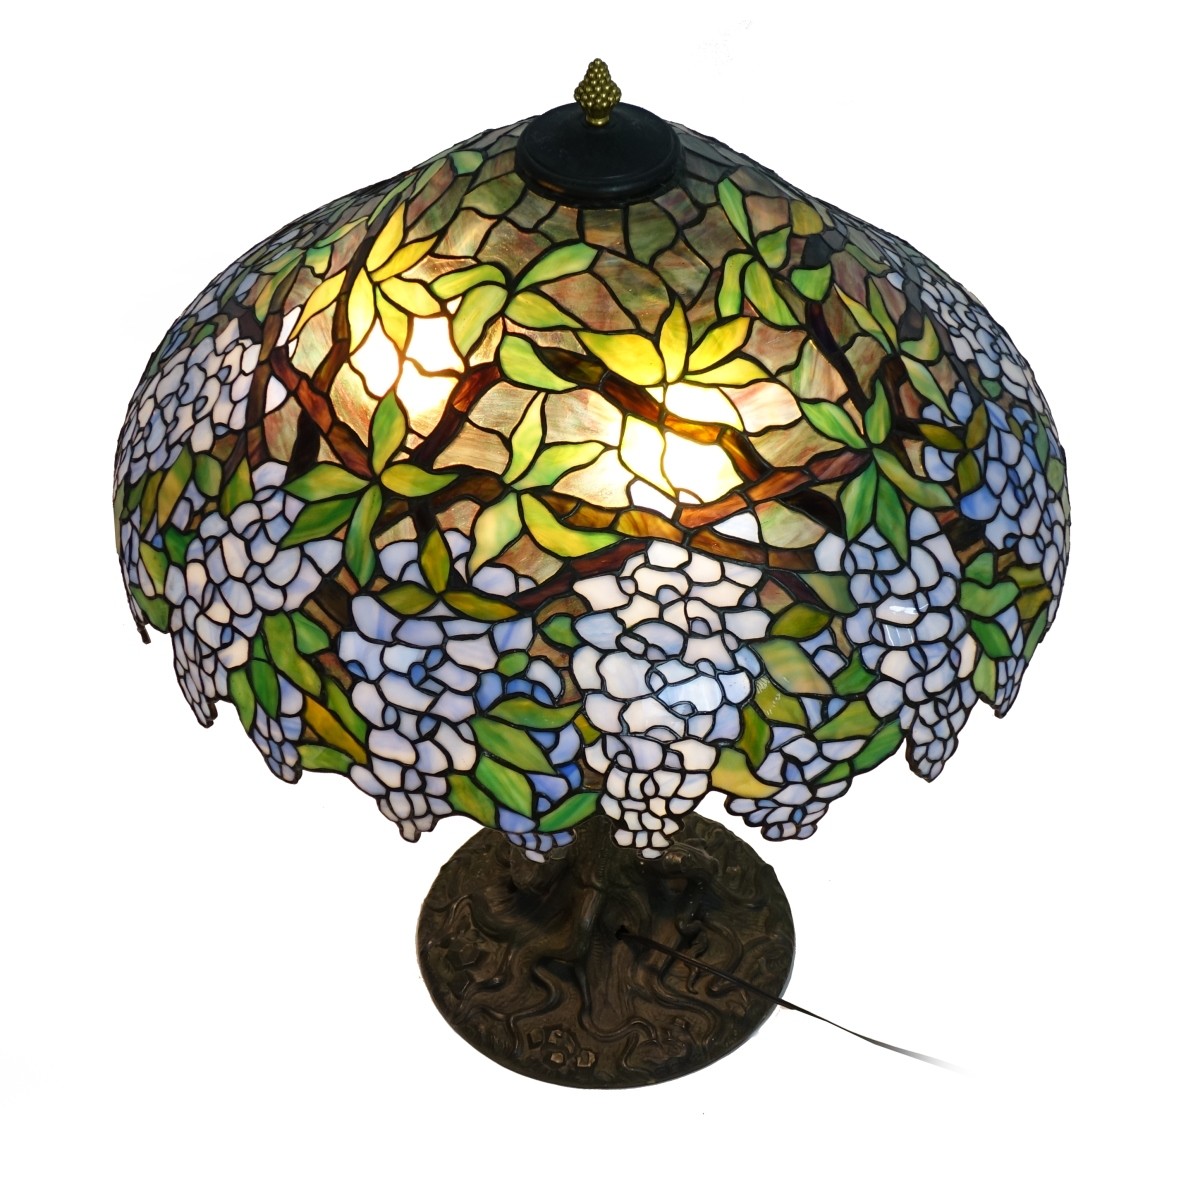 Handel Lamp with Stained Glass Shade